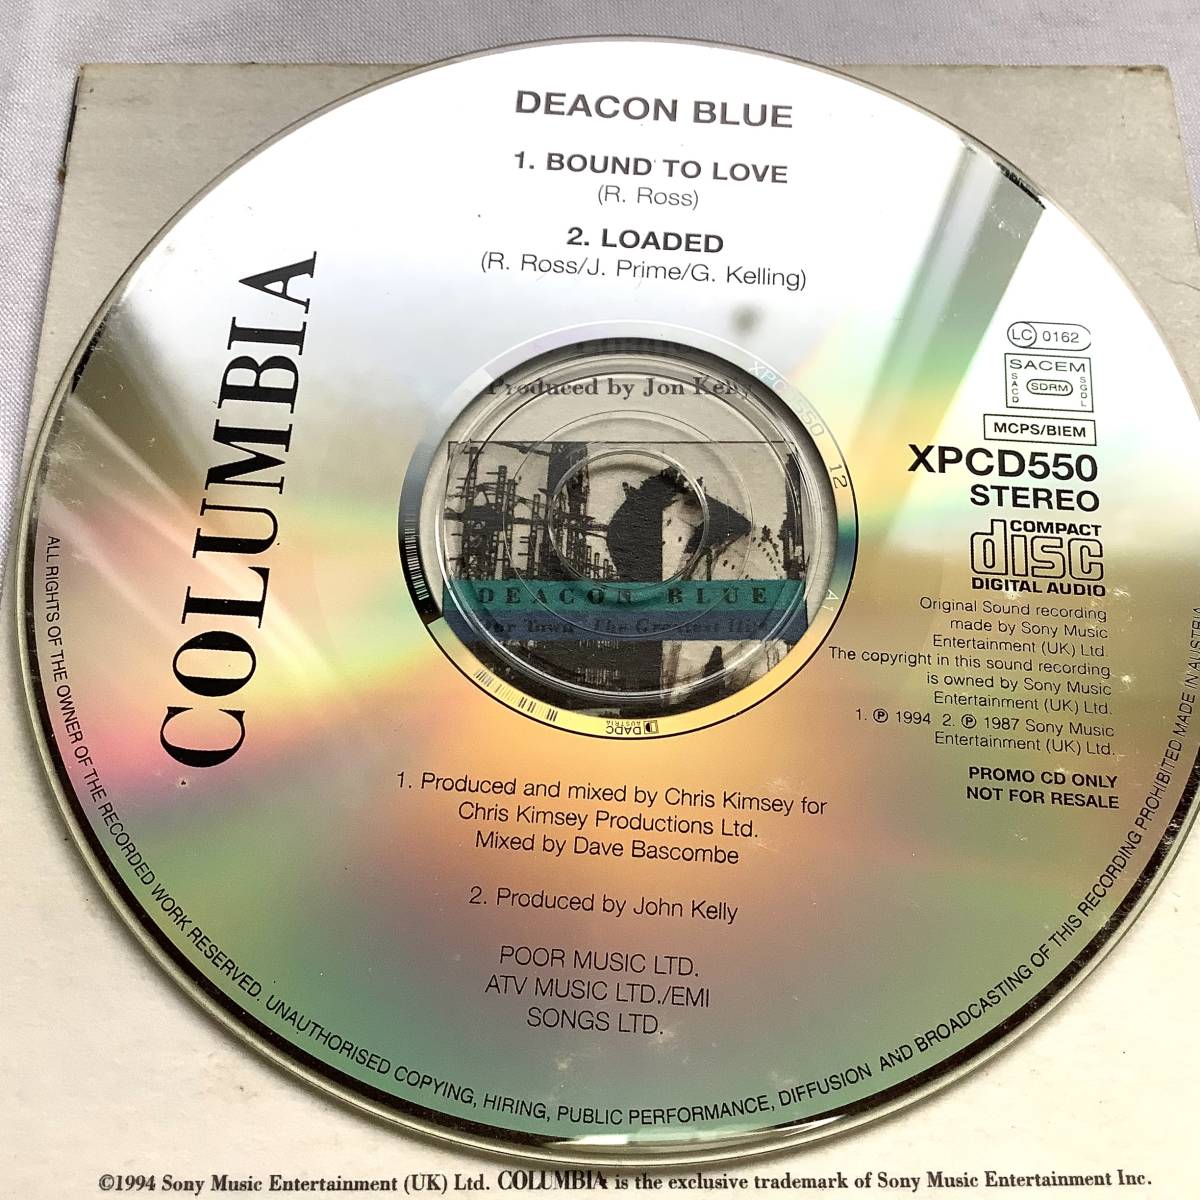 PROMO CD レア 非売品 プロモ盤 入手困難 Deacon Blue Bound To Love / Loaded XPCD550 ディーコンブルー NOT FOR SALE